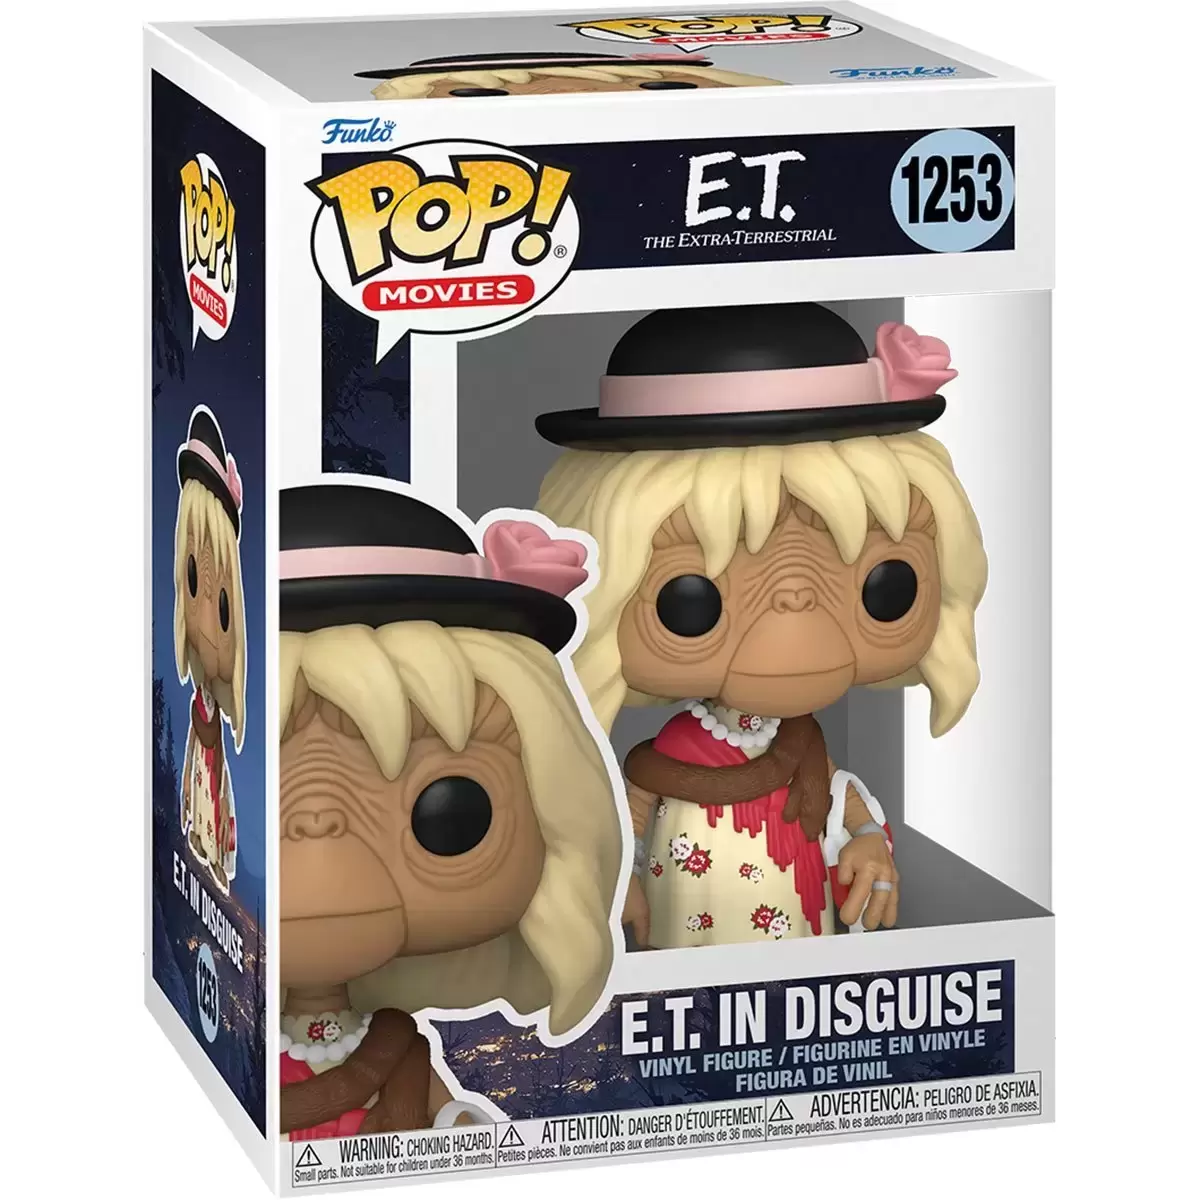 POP! Movies - E.T. - E.T. in Disguise